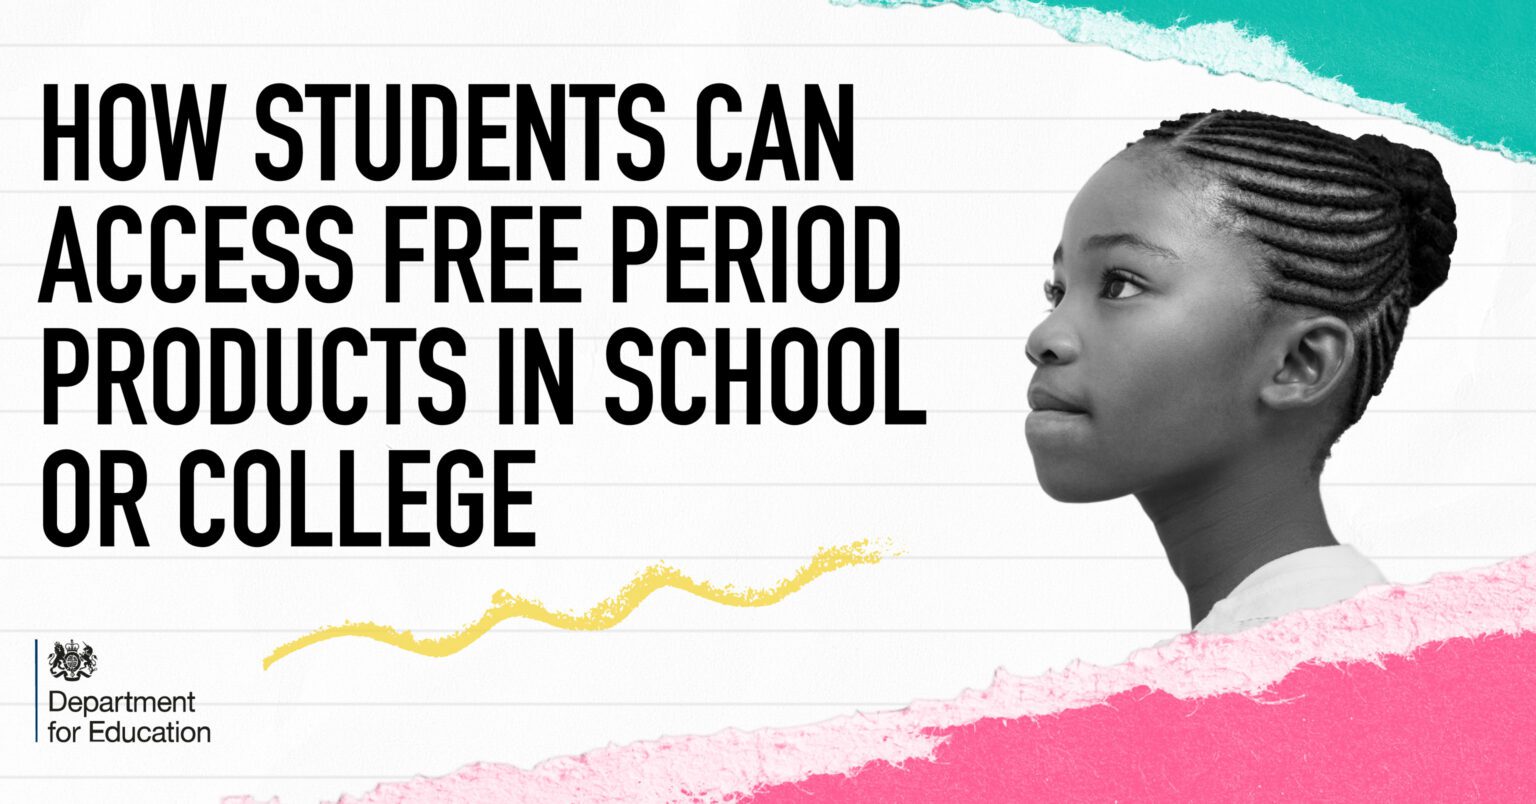 How students can access free period products in school or college